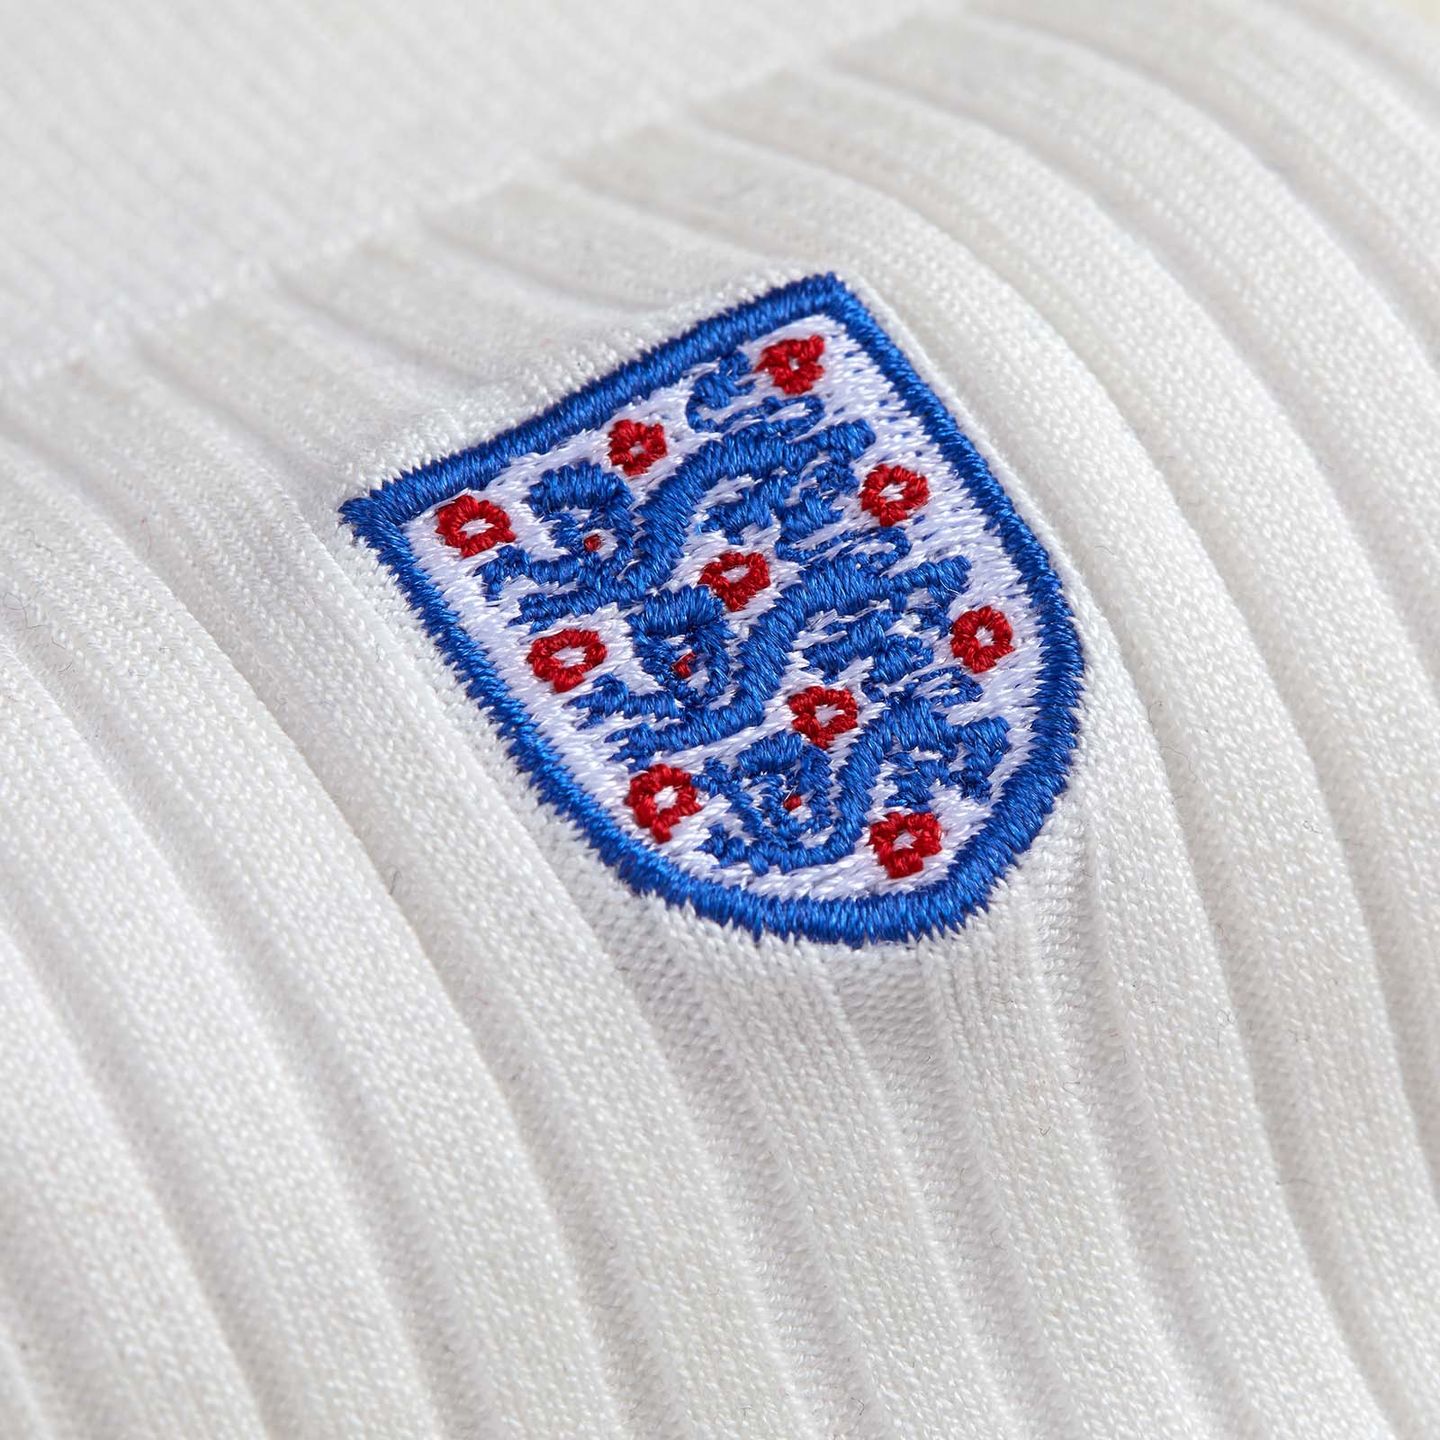 Close up of a white sock with the England 3 lion logo embroidered in